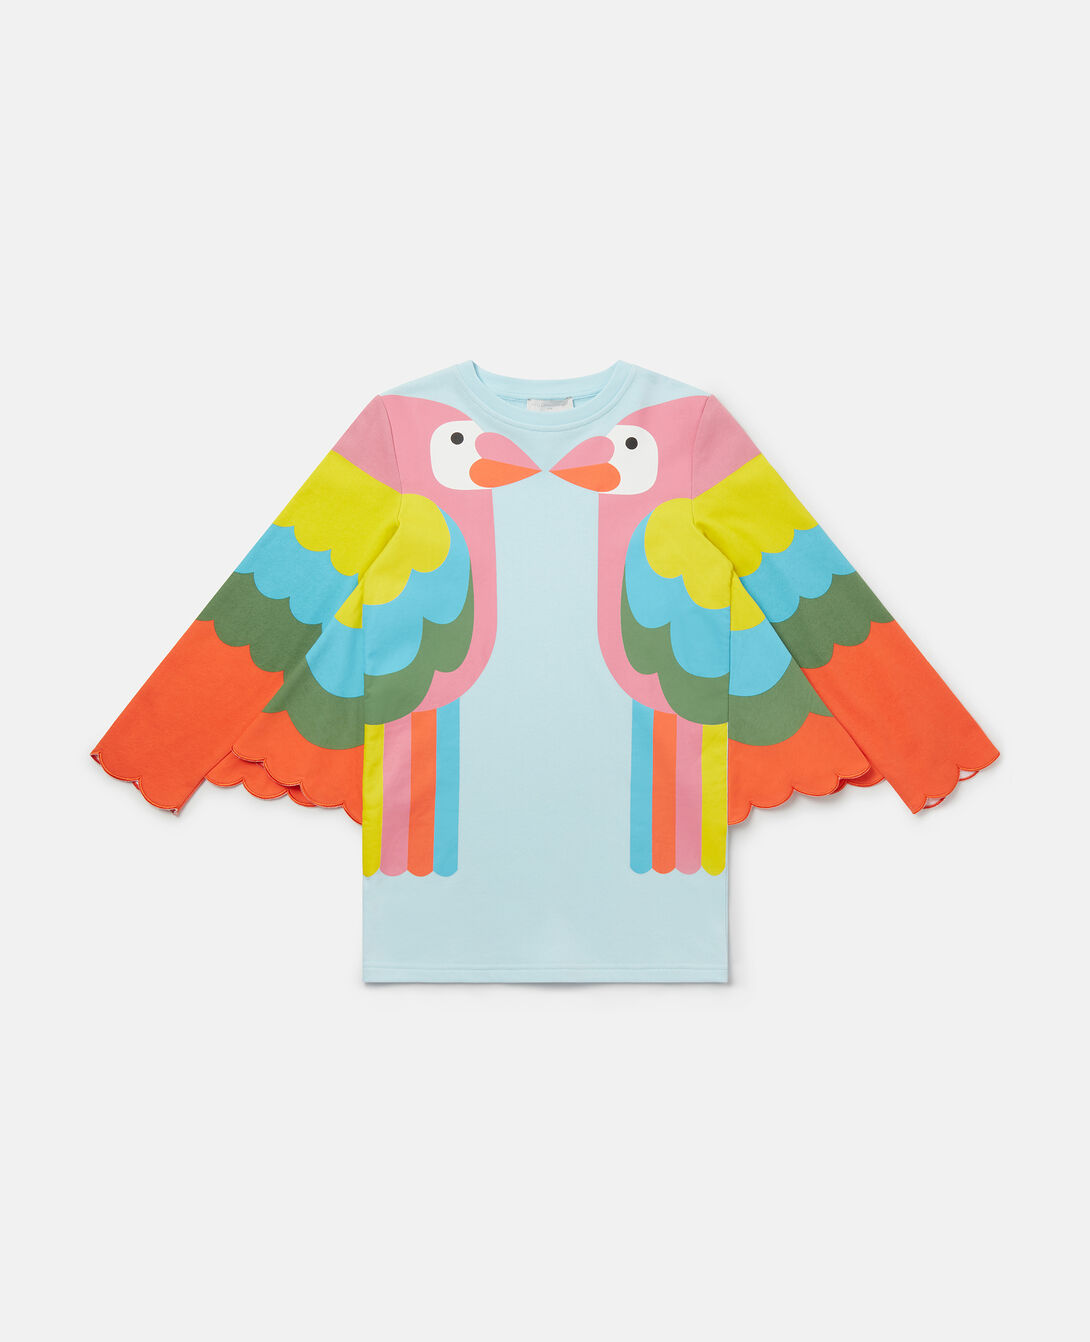 Kids Stella McCartney Child Dress - White with Parrots Embroidery